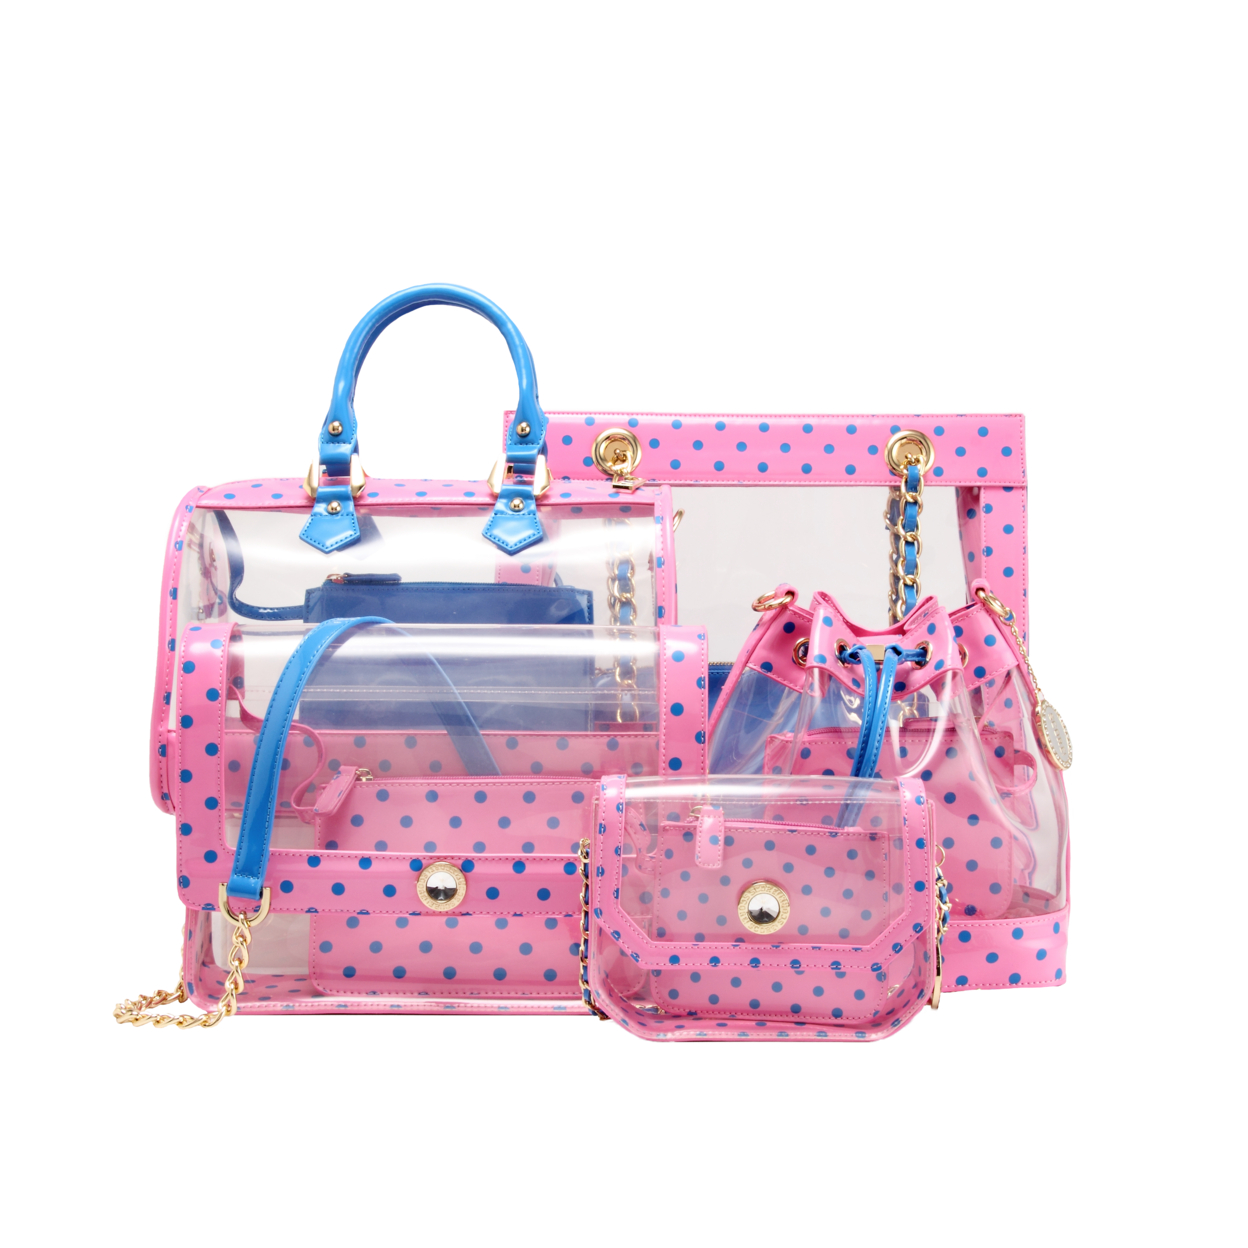 SCORE! Andrea Large Clear Designer Tote For School, Work, Travel - Pink And Blue